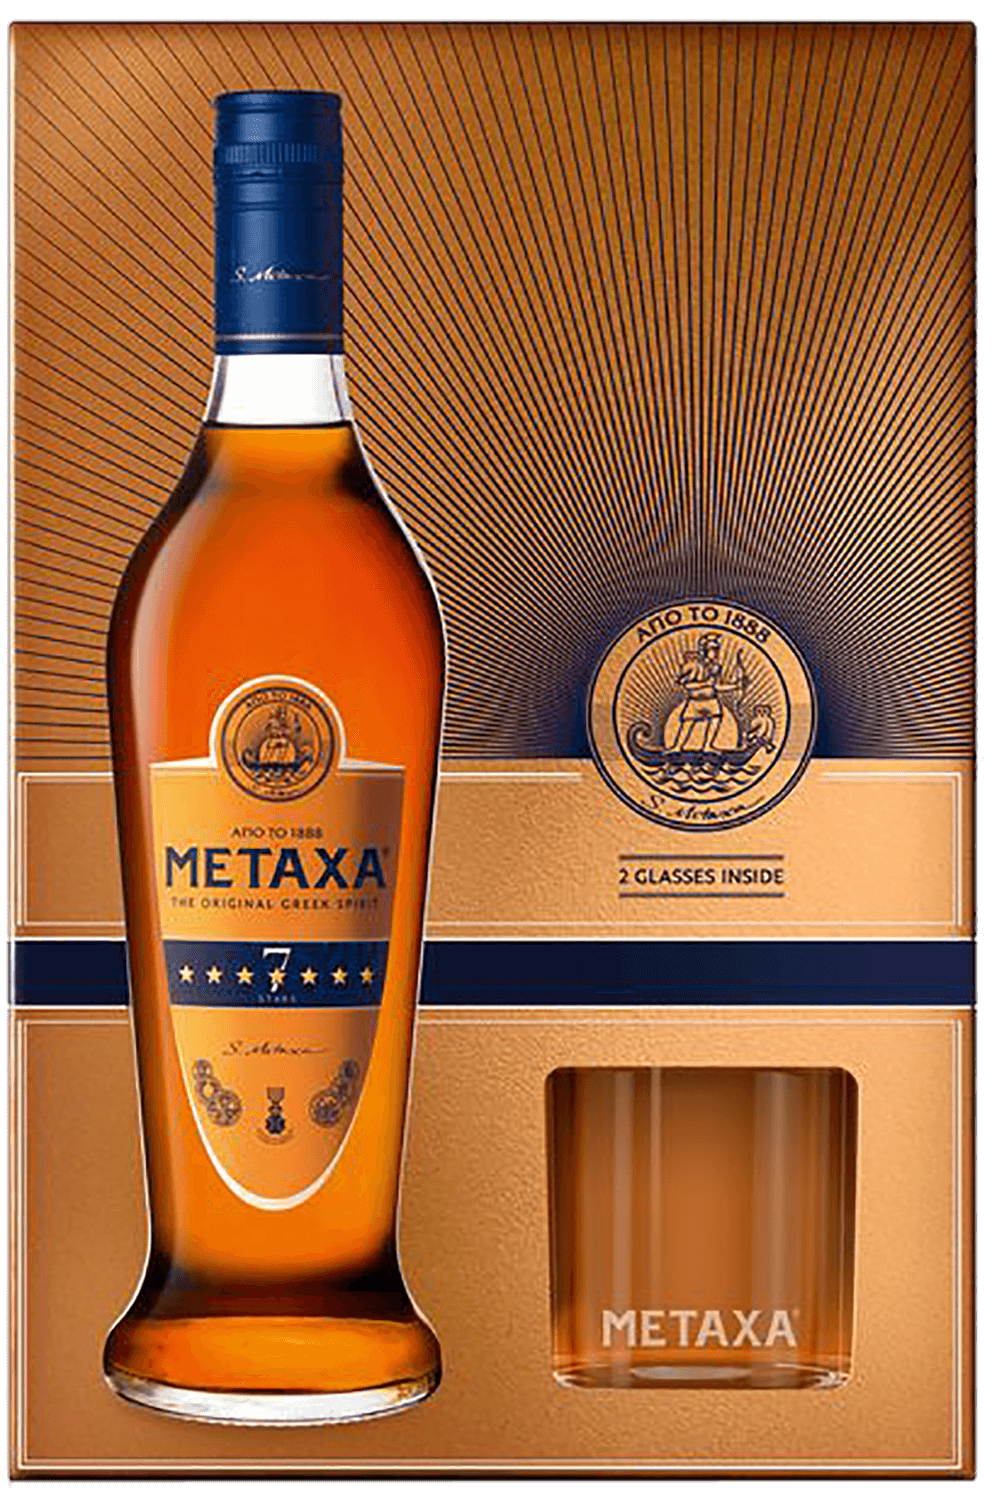 Metaxa 7 stars (gift box with two glasses)